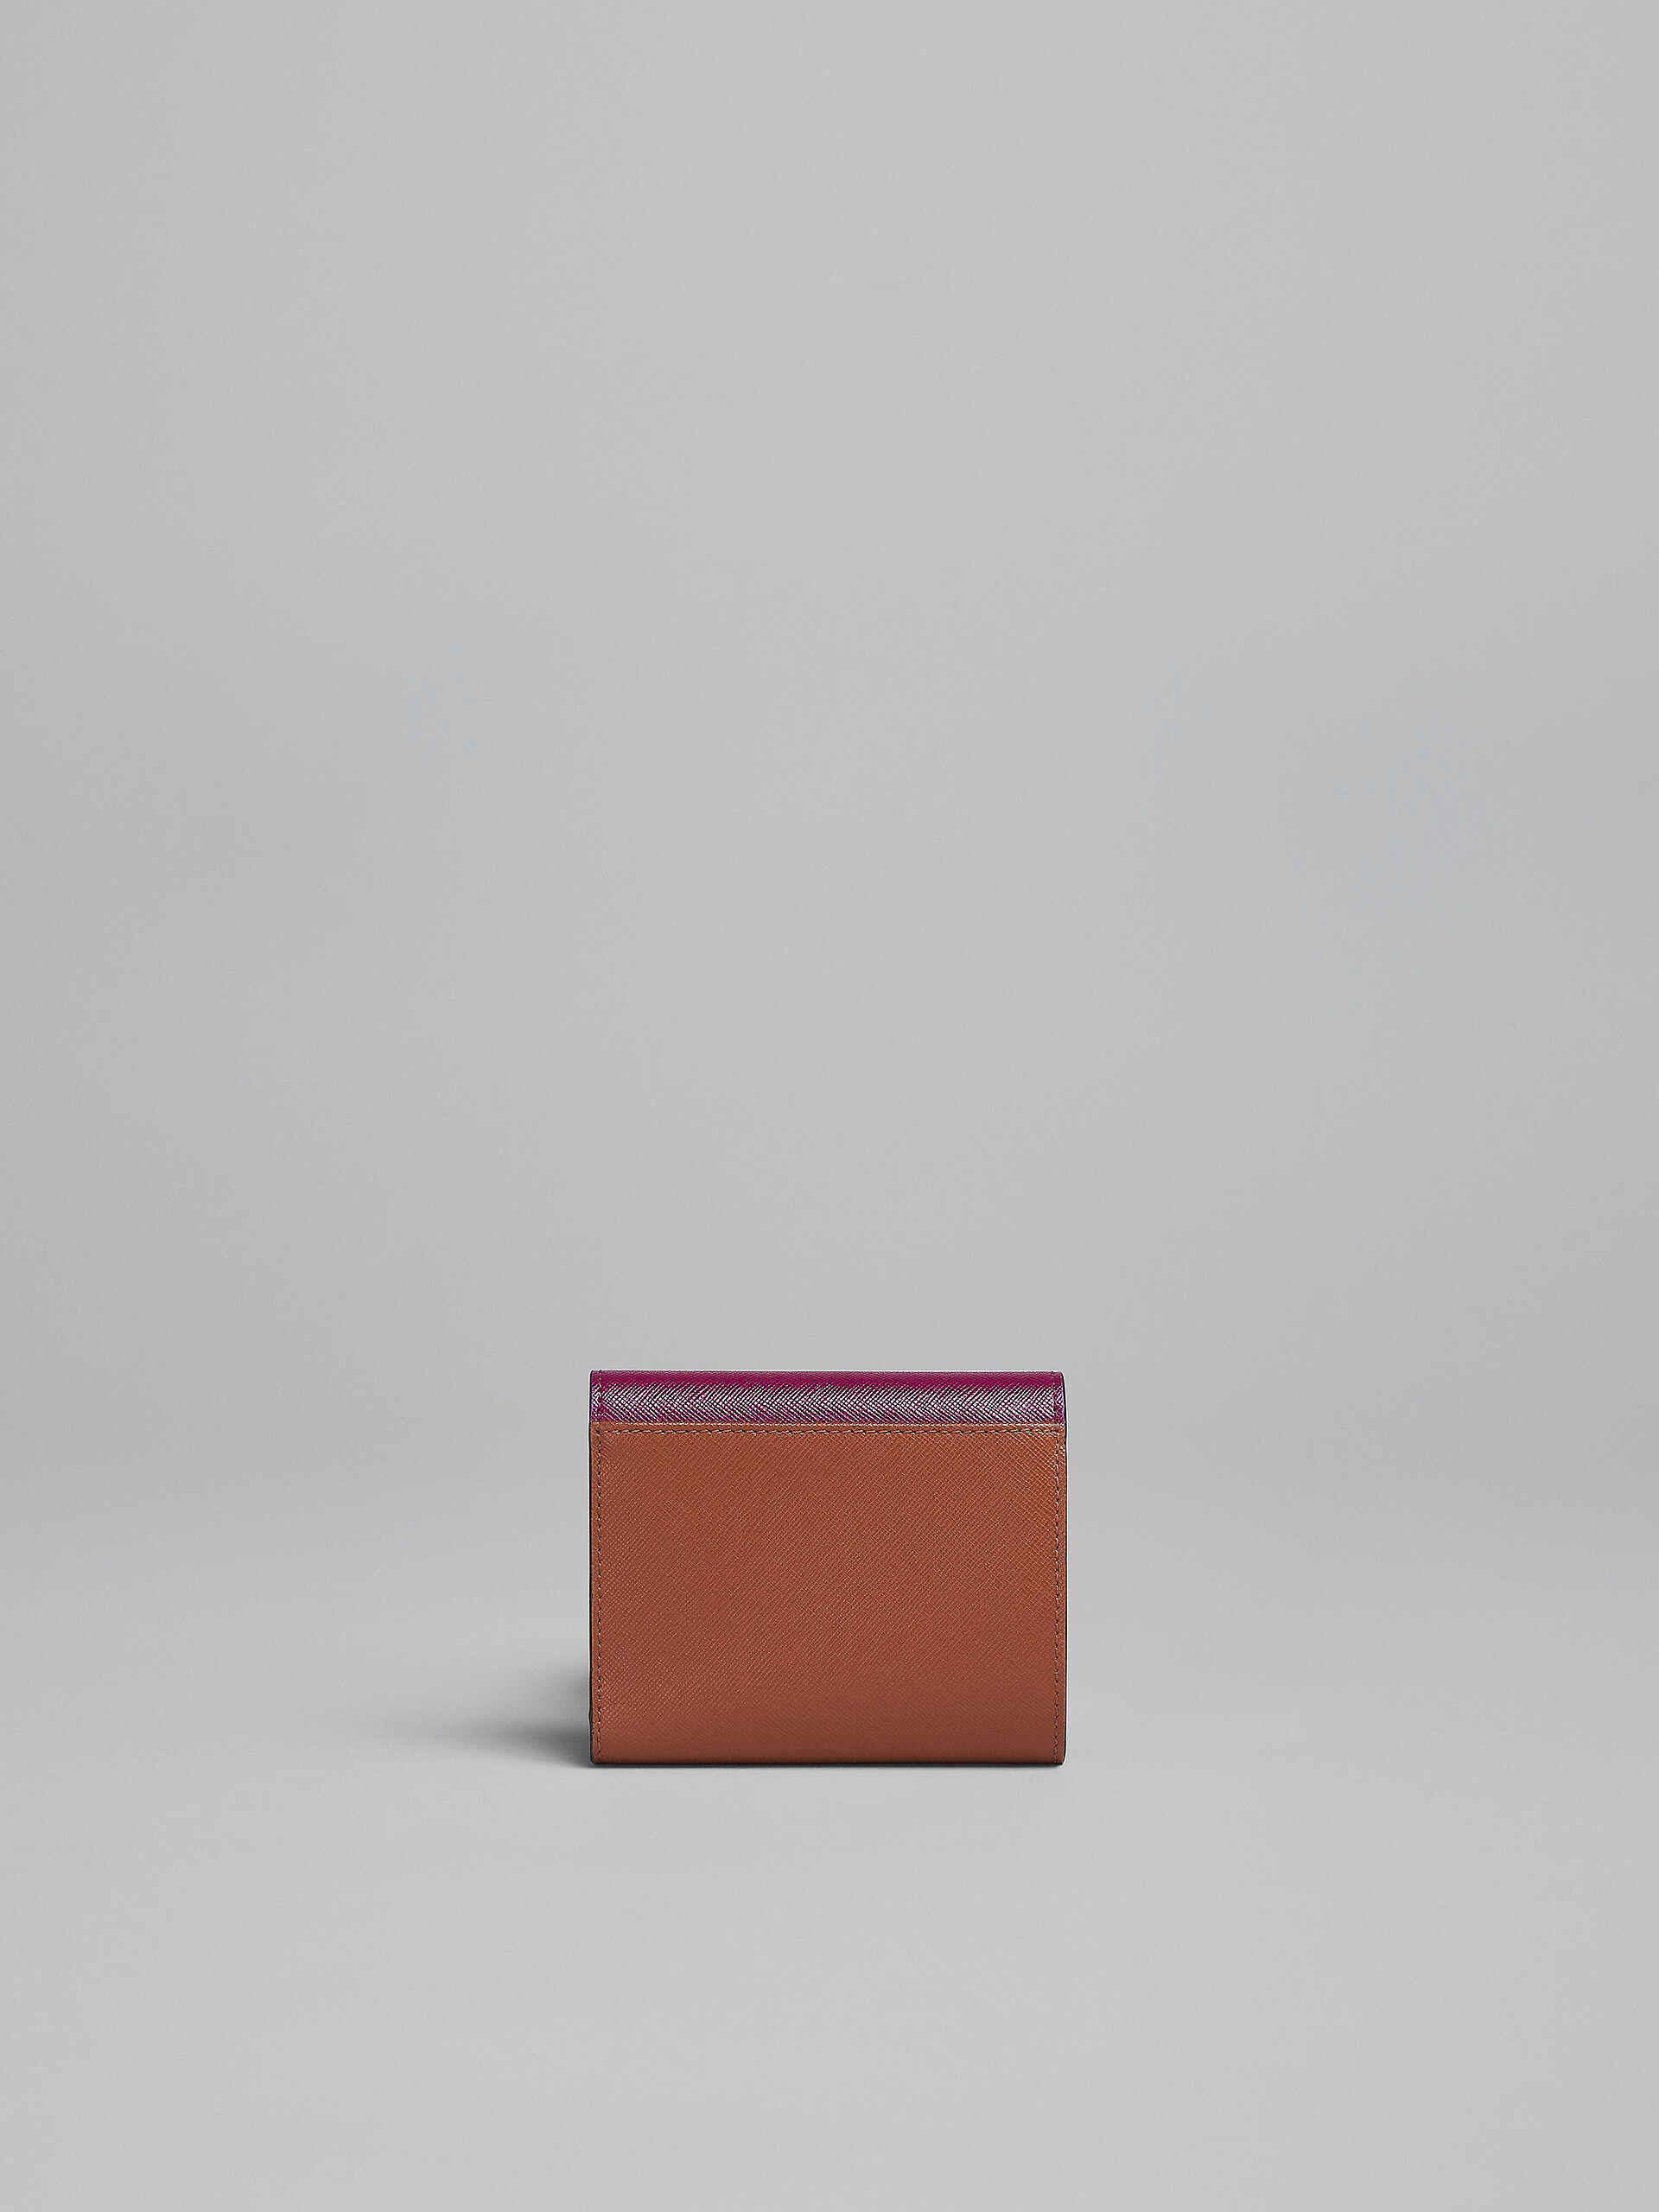 Purple grey and brown saffiano tri-fold wallet - Wallets - Image 3